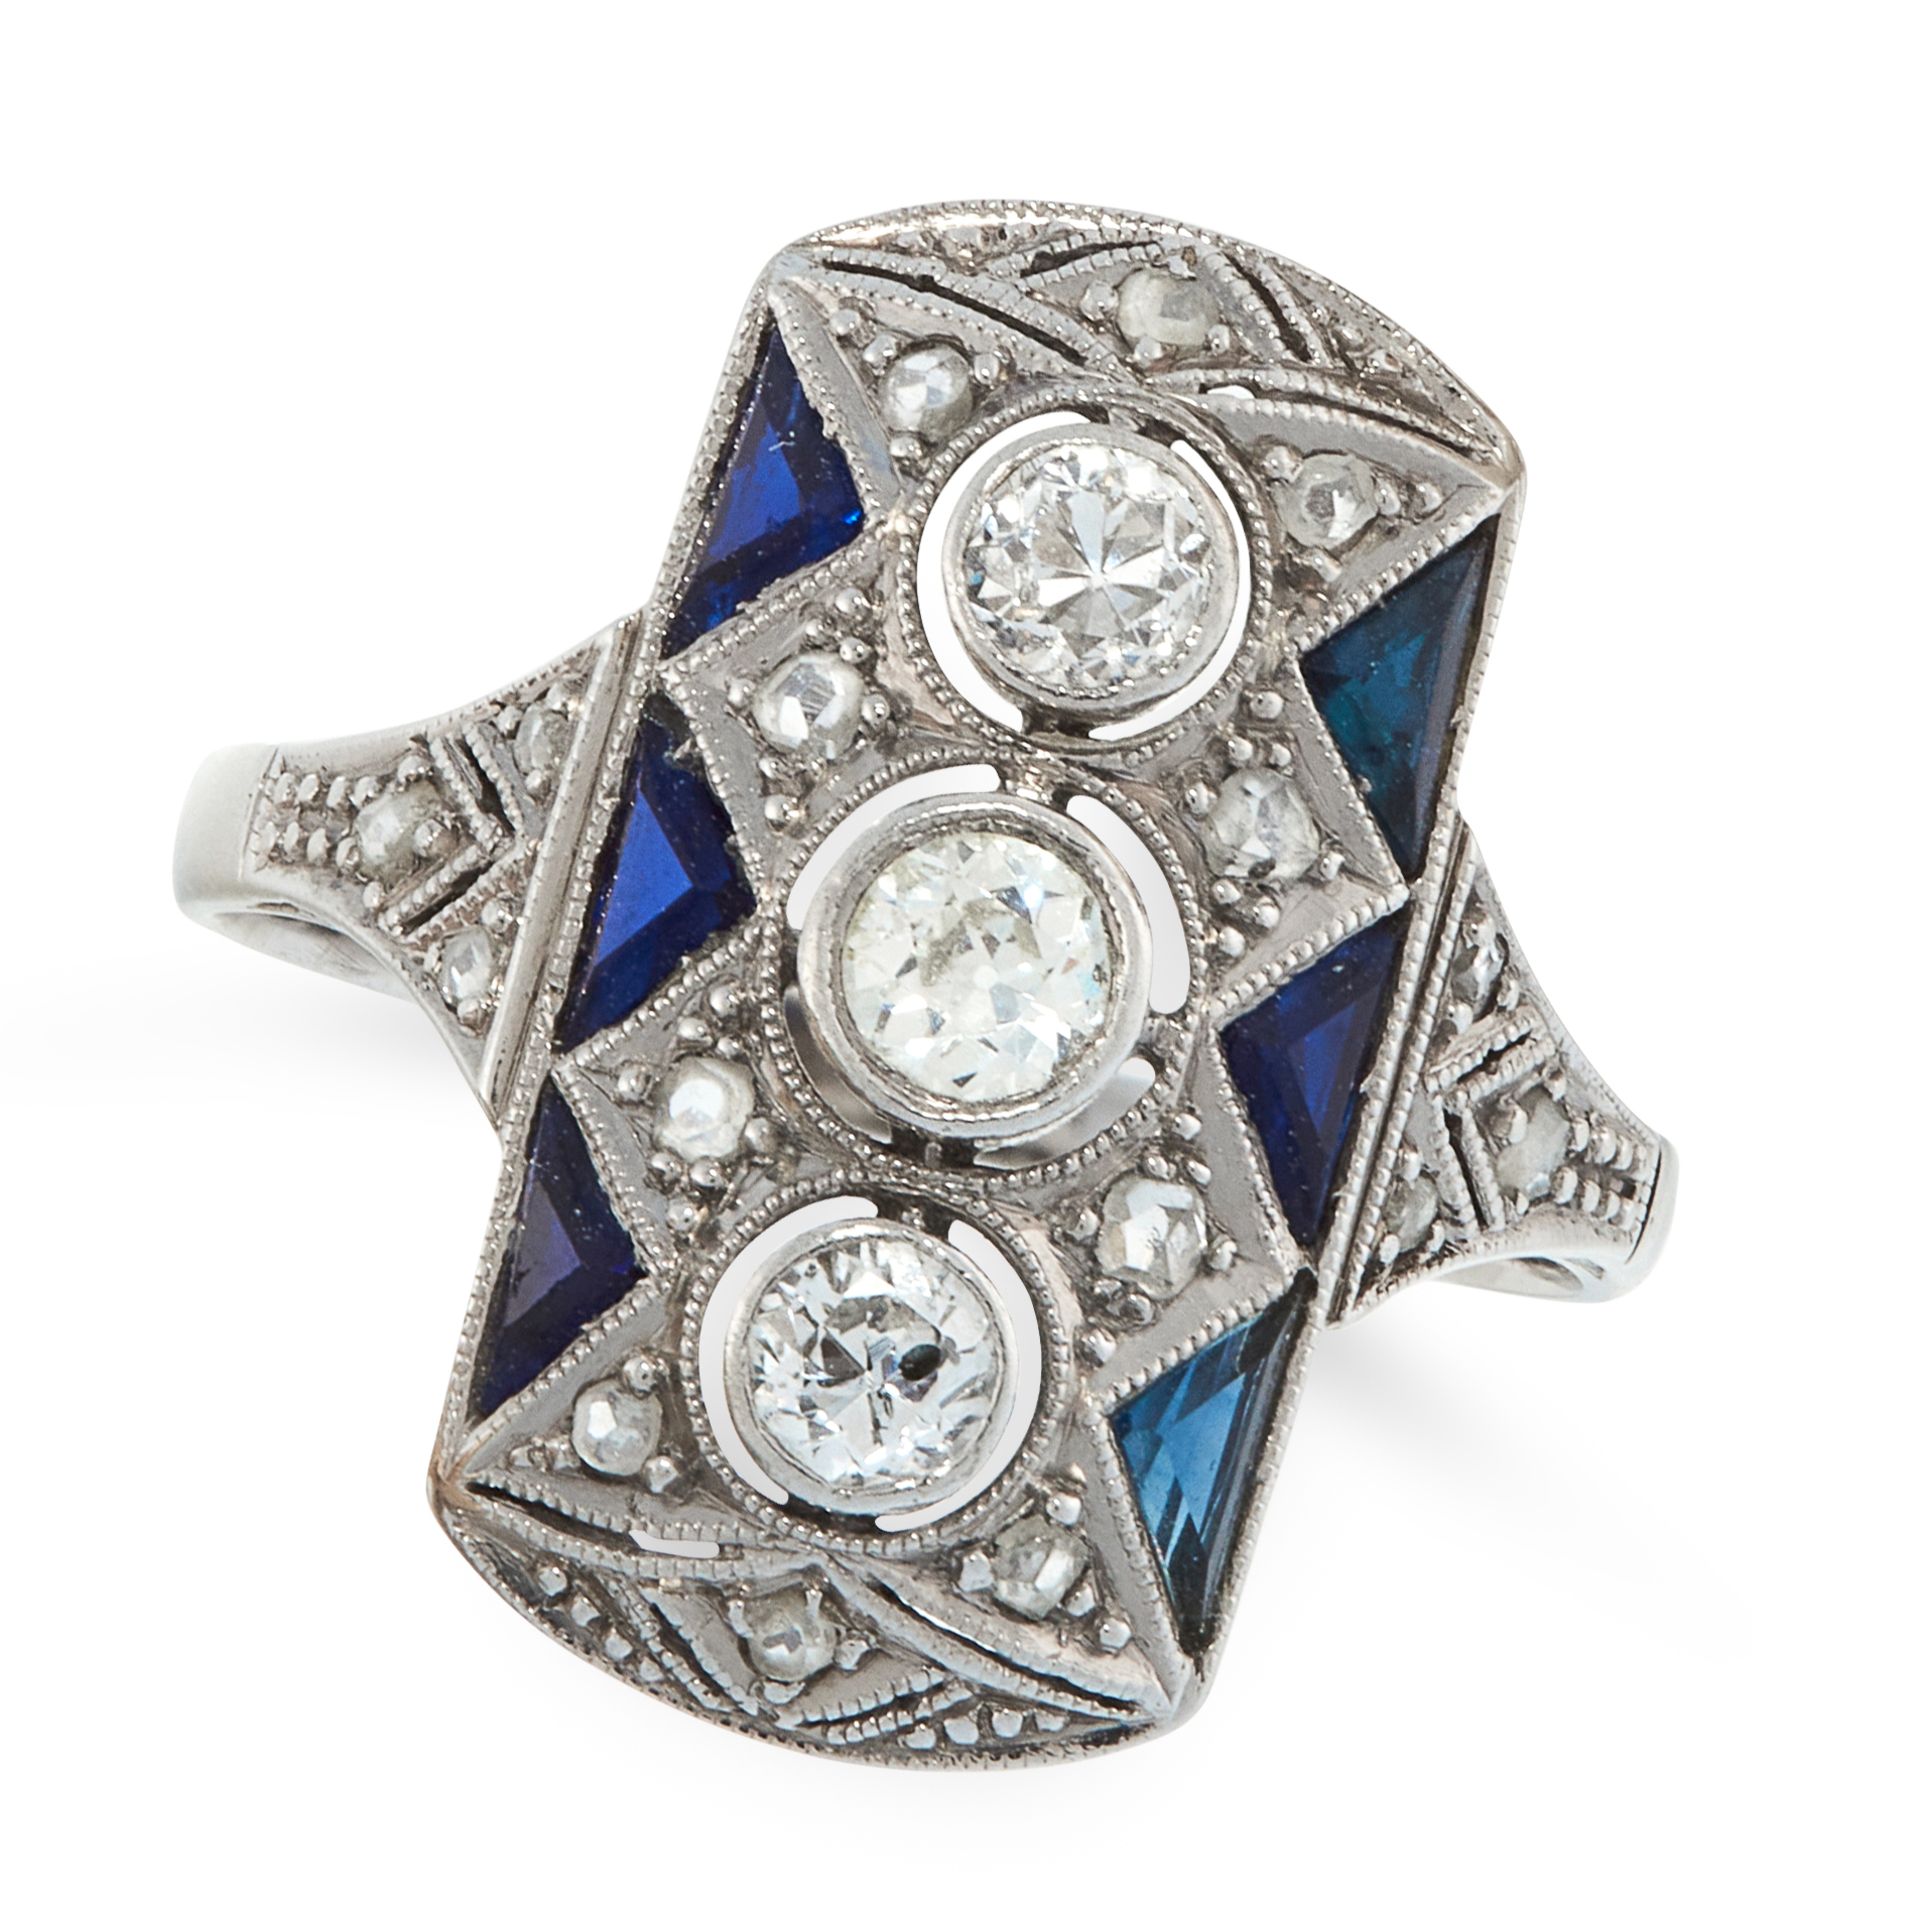 AN ART DECO DIAMOND AND SAPPHIRE RING, EARLY 20TH CENTURY in 18ct white gold, the rectangular face